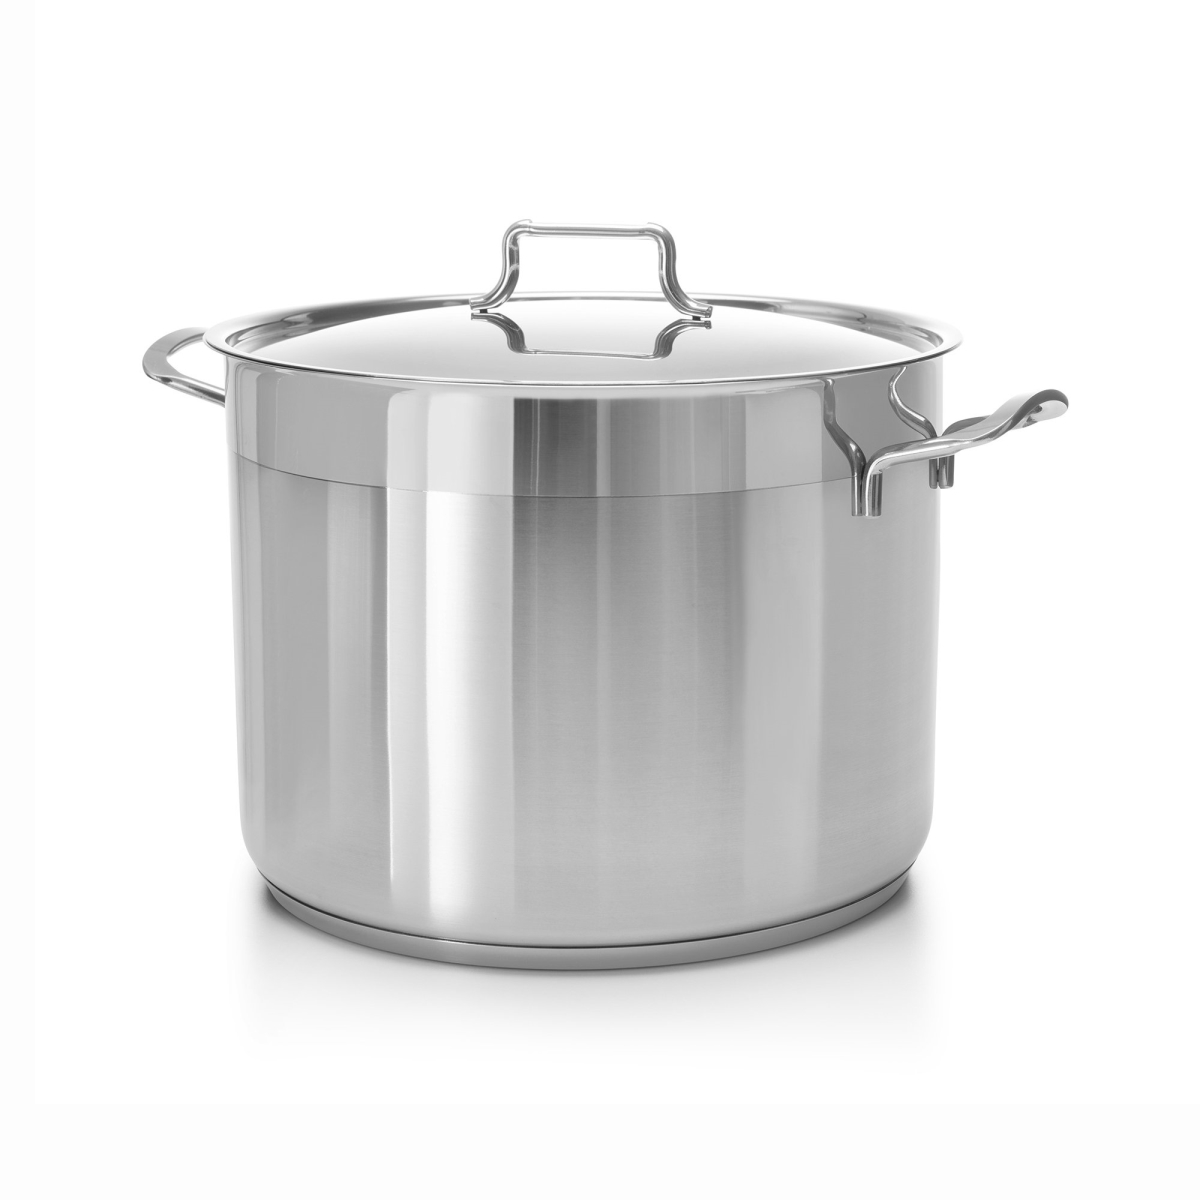 H4 4 Qt. Classic 18 By 10 Stainless Steel Stockpot Covered In Cookware Induction